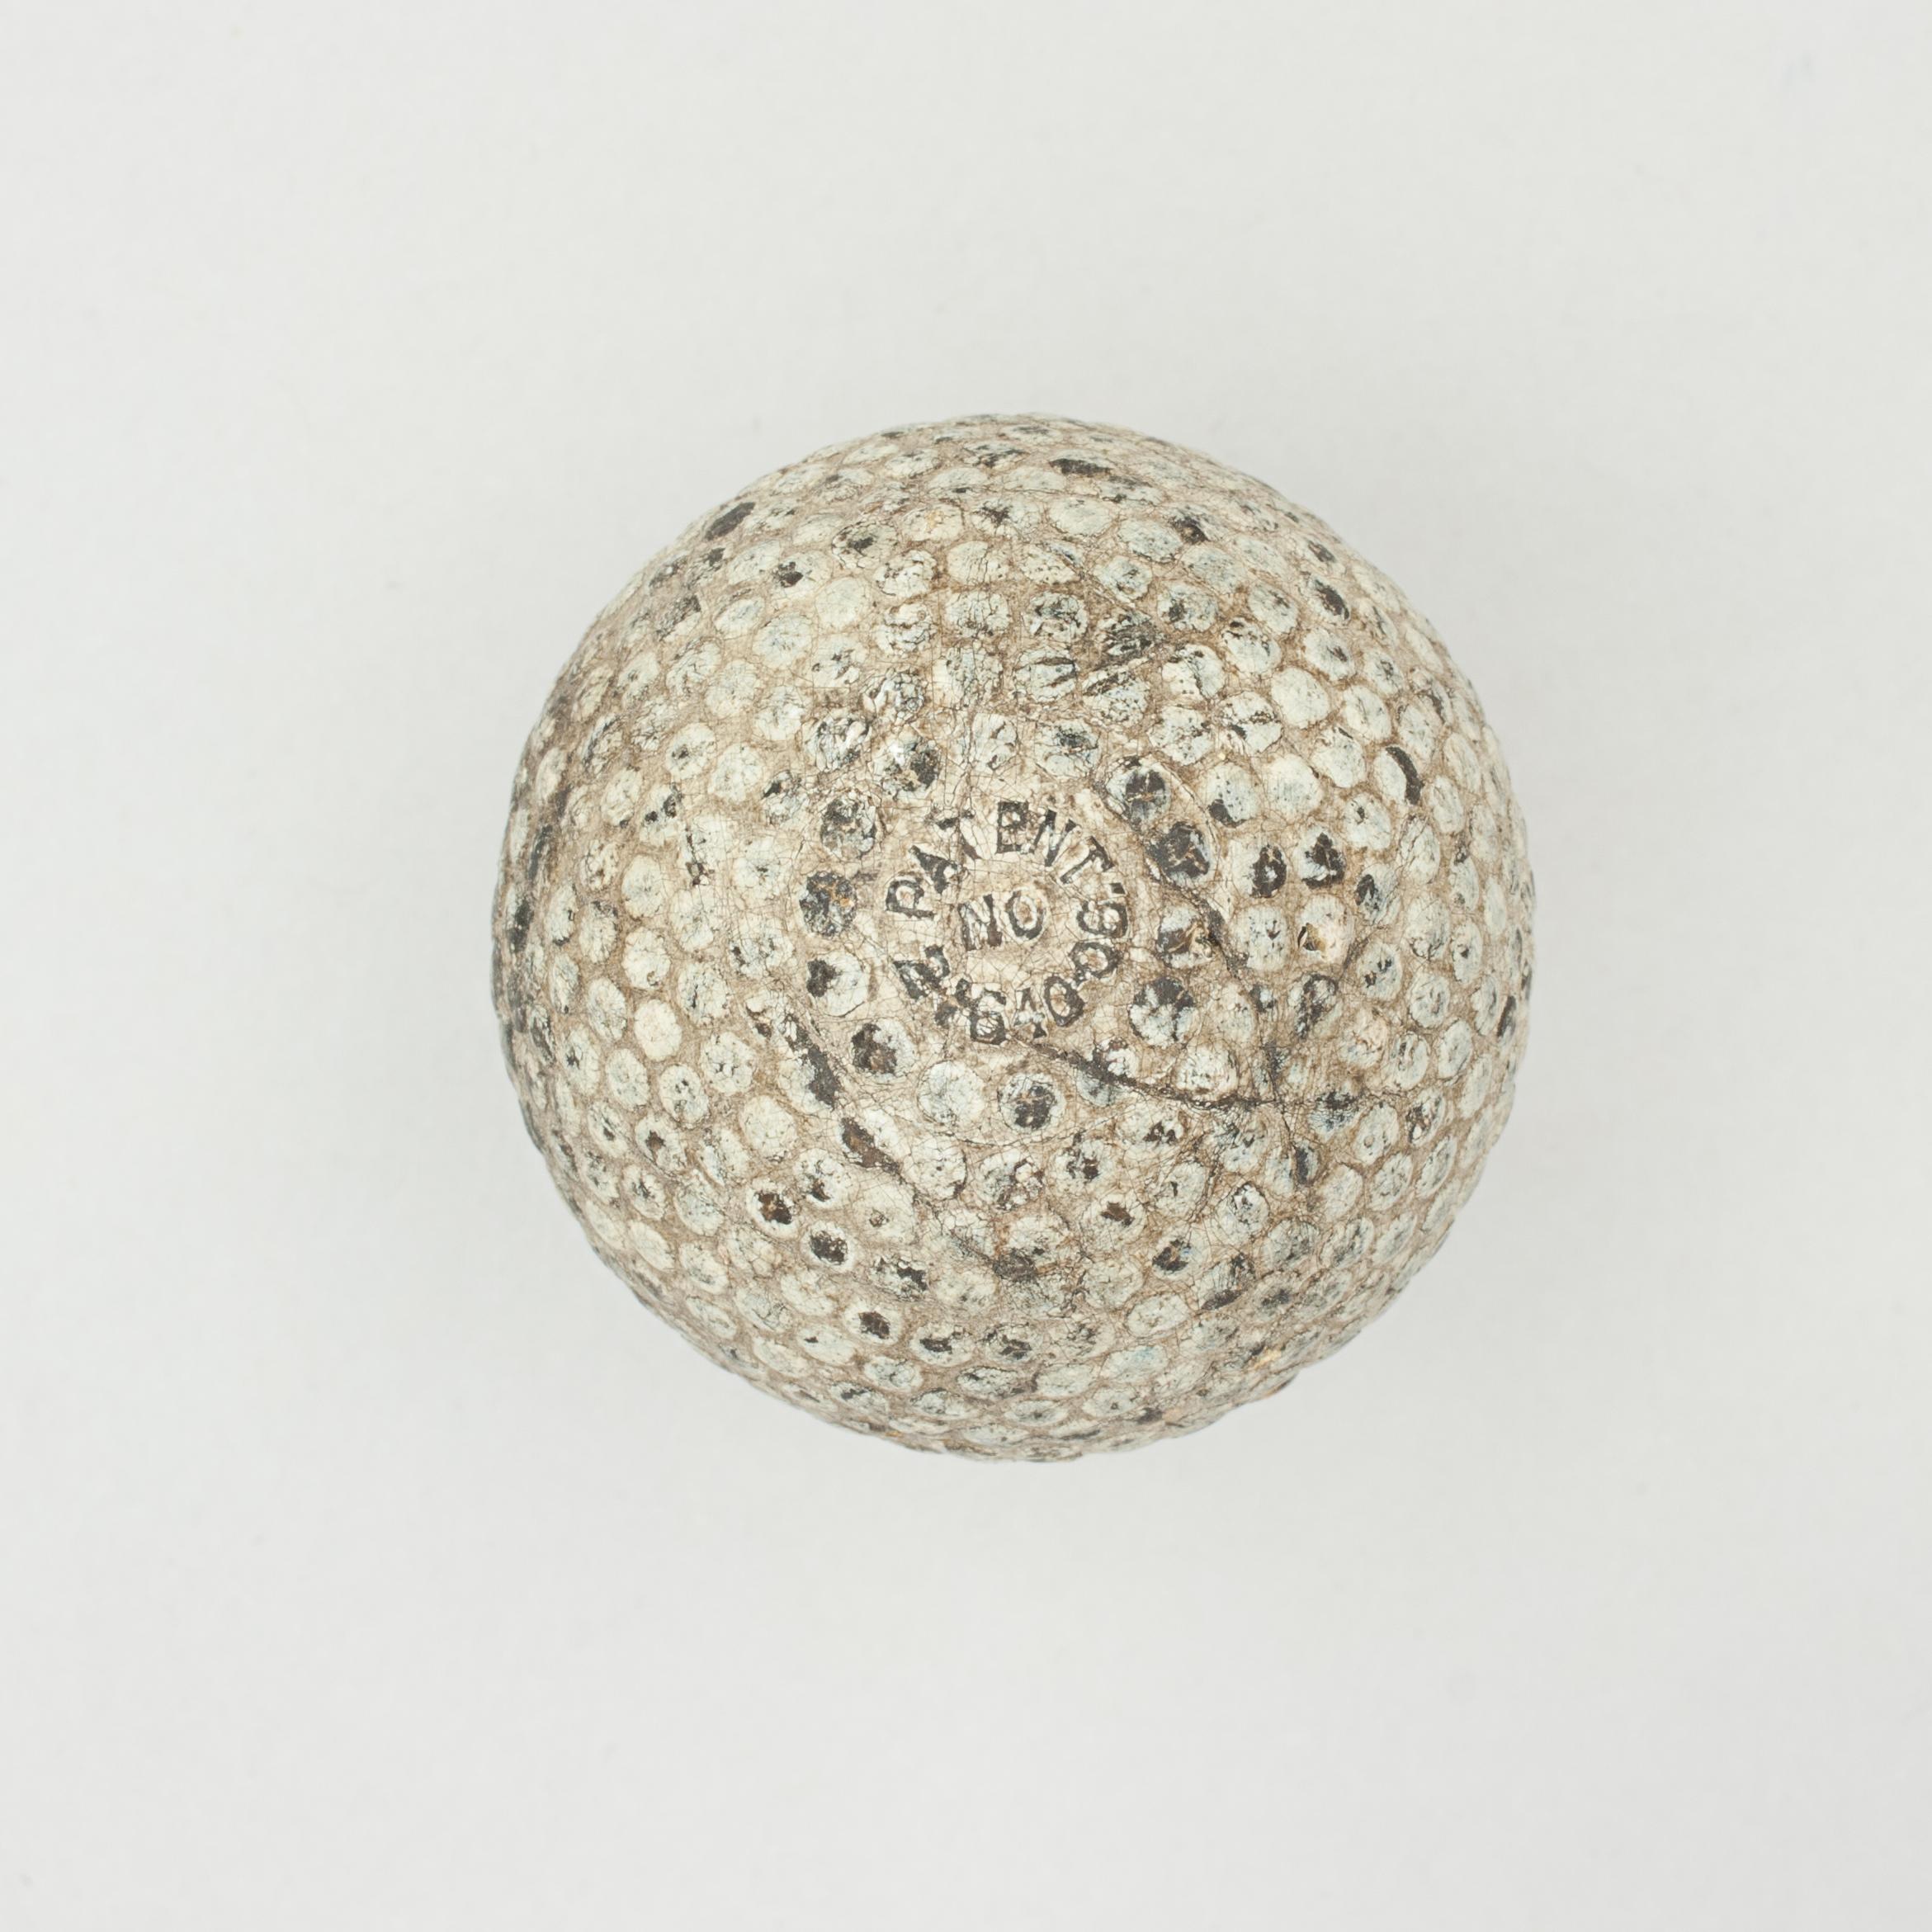 A good example of a bramble patterned rubber core golf ball. The golf ball is in good condition and is manufactured by St. Mungo Manufacturing Co. The ball is marked 'The Colonel' on one pole, 'Patent No. 2164006' on the other and is with the